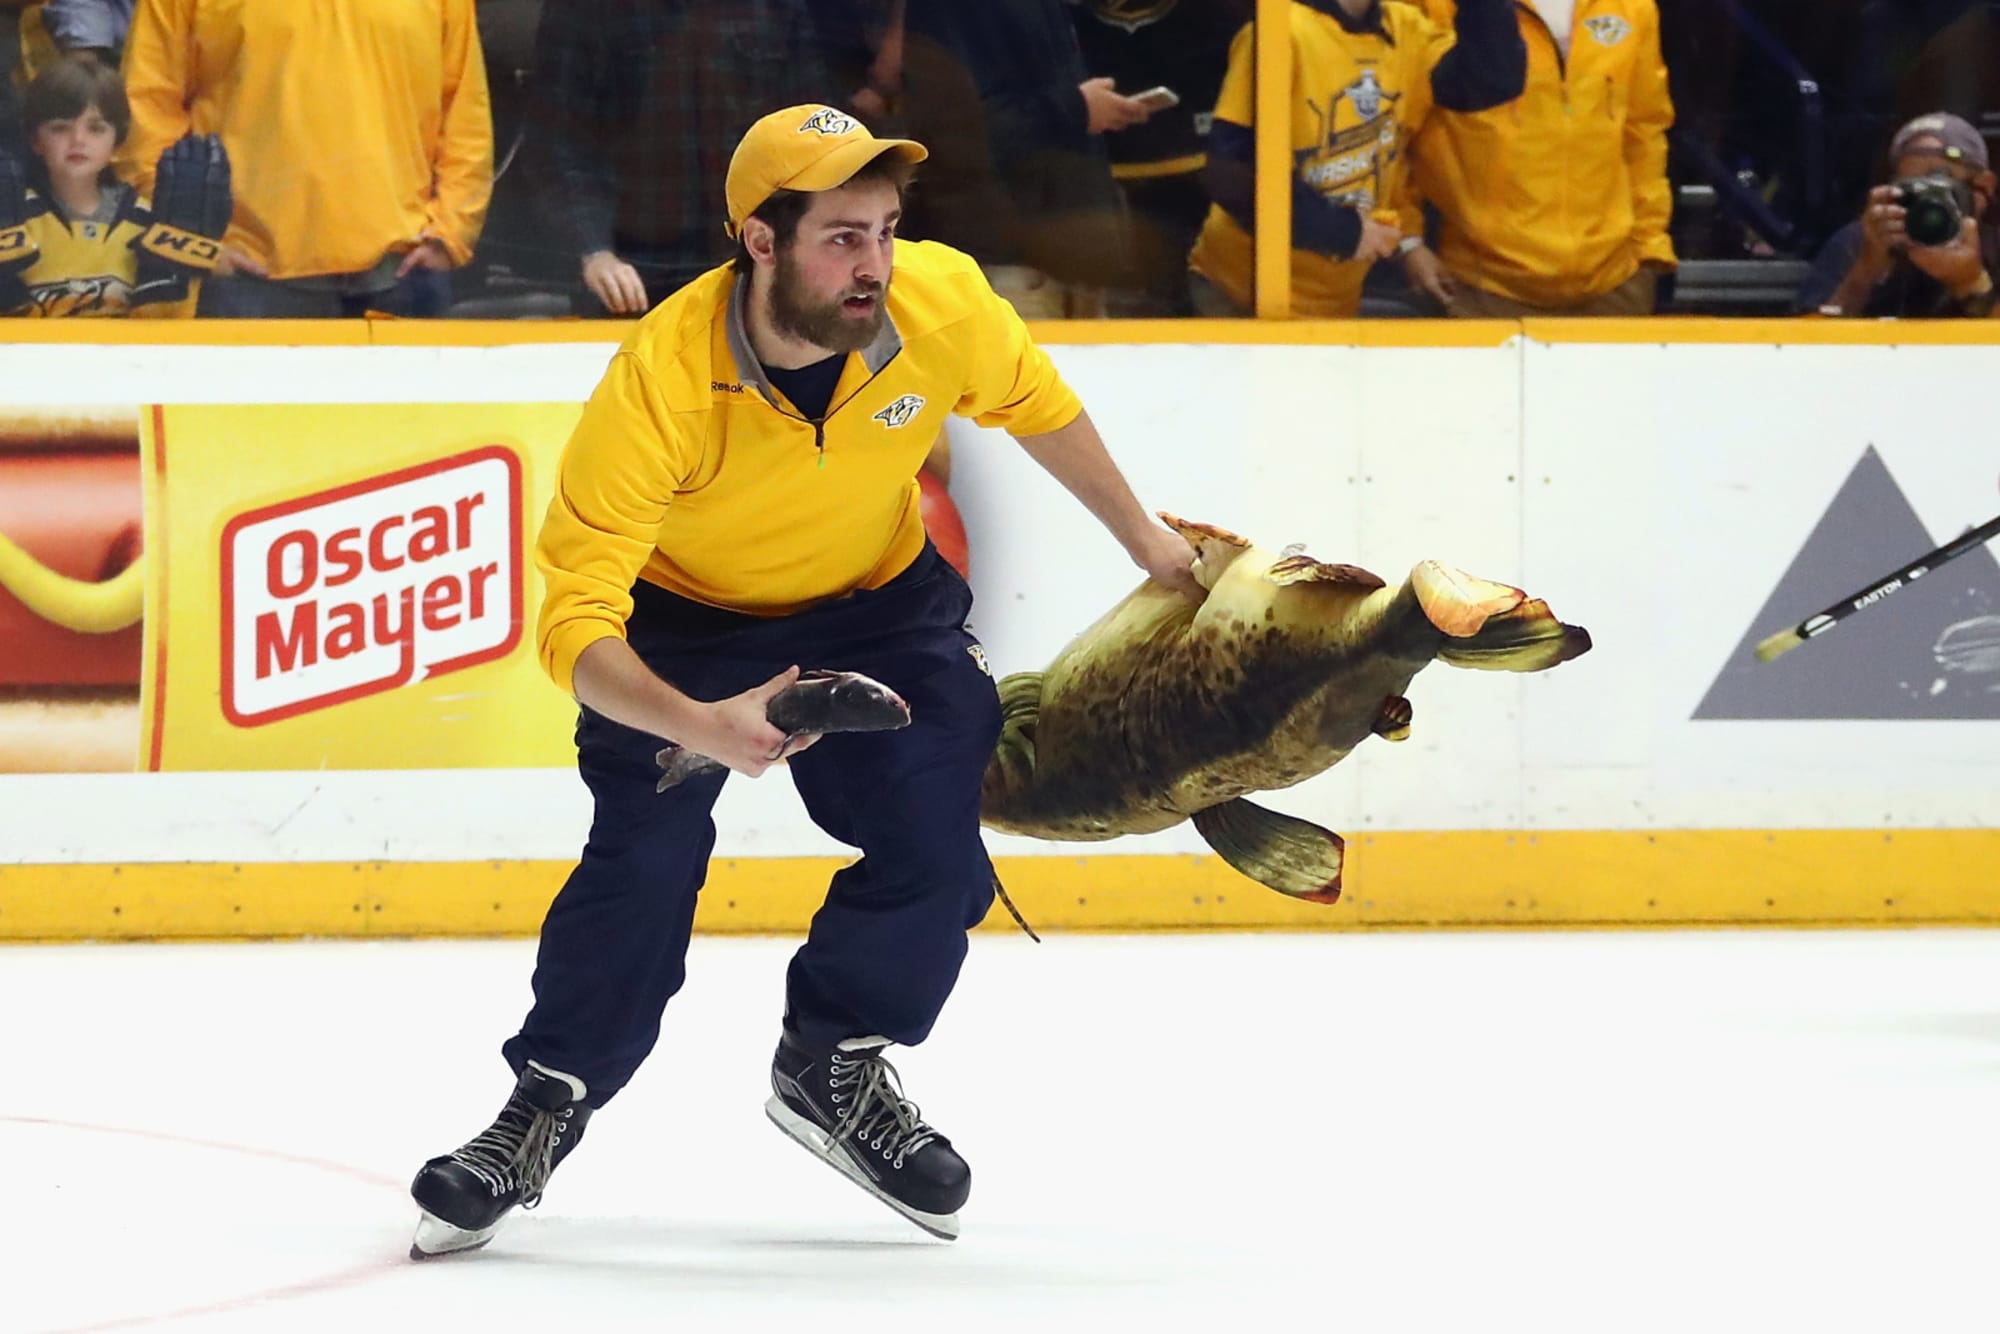 Why do Florida Panthers fans throw rats on the ice?